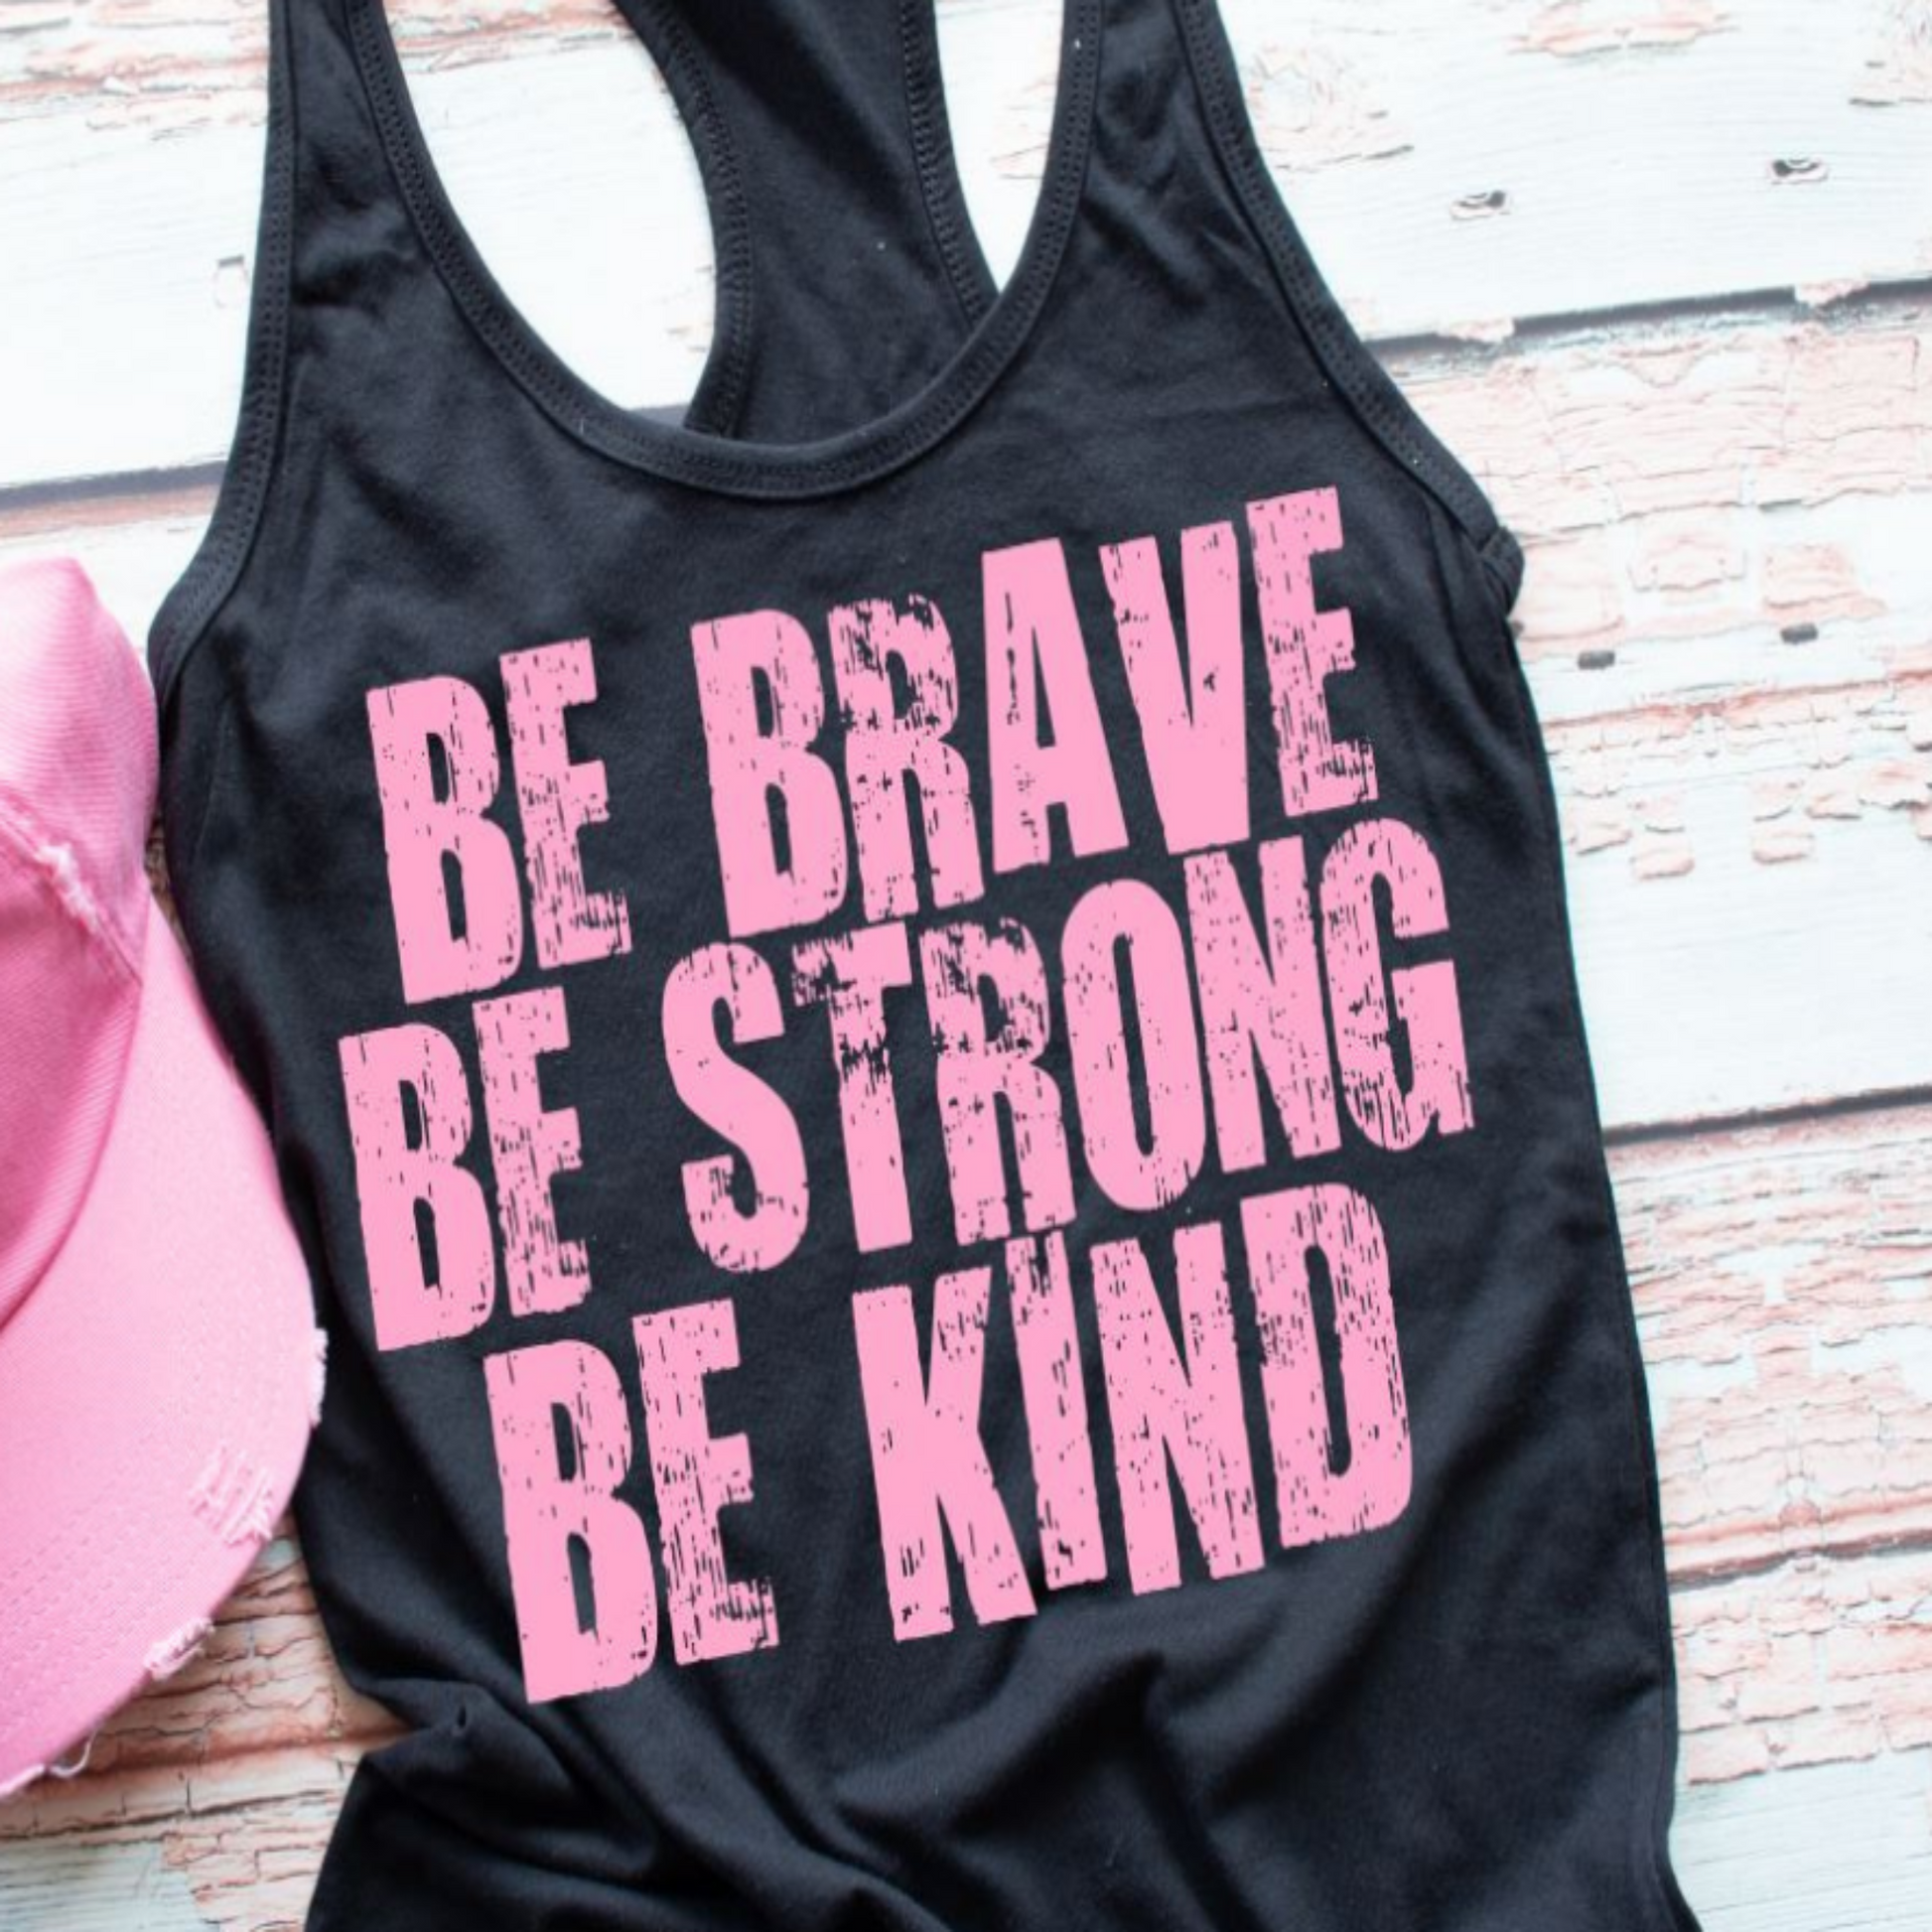 brave_strong_kind specialty tee sleeveless top motivational racerback